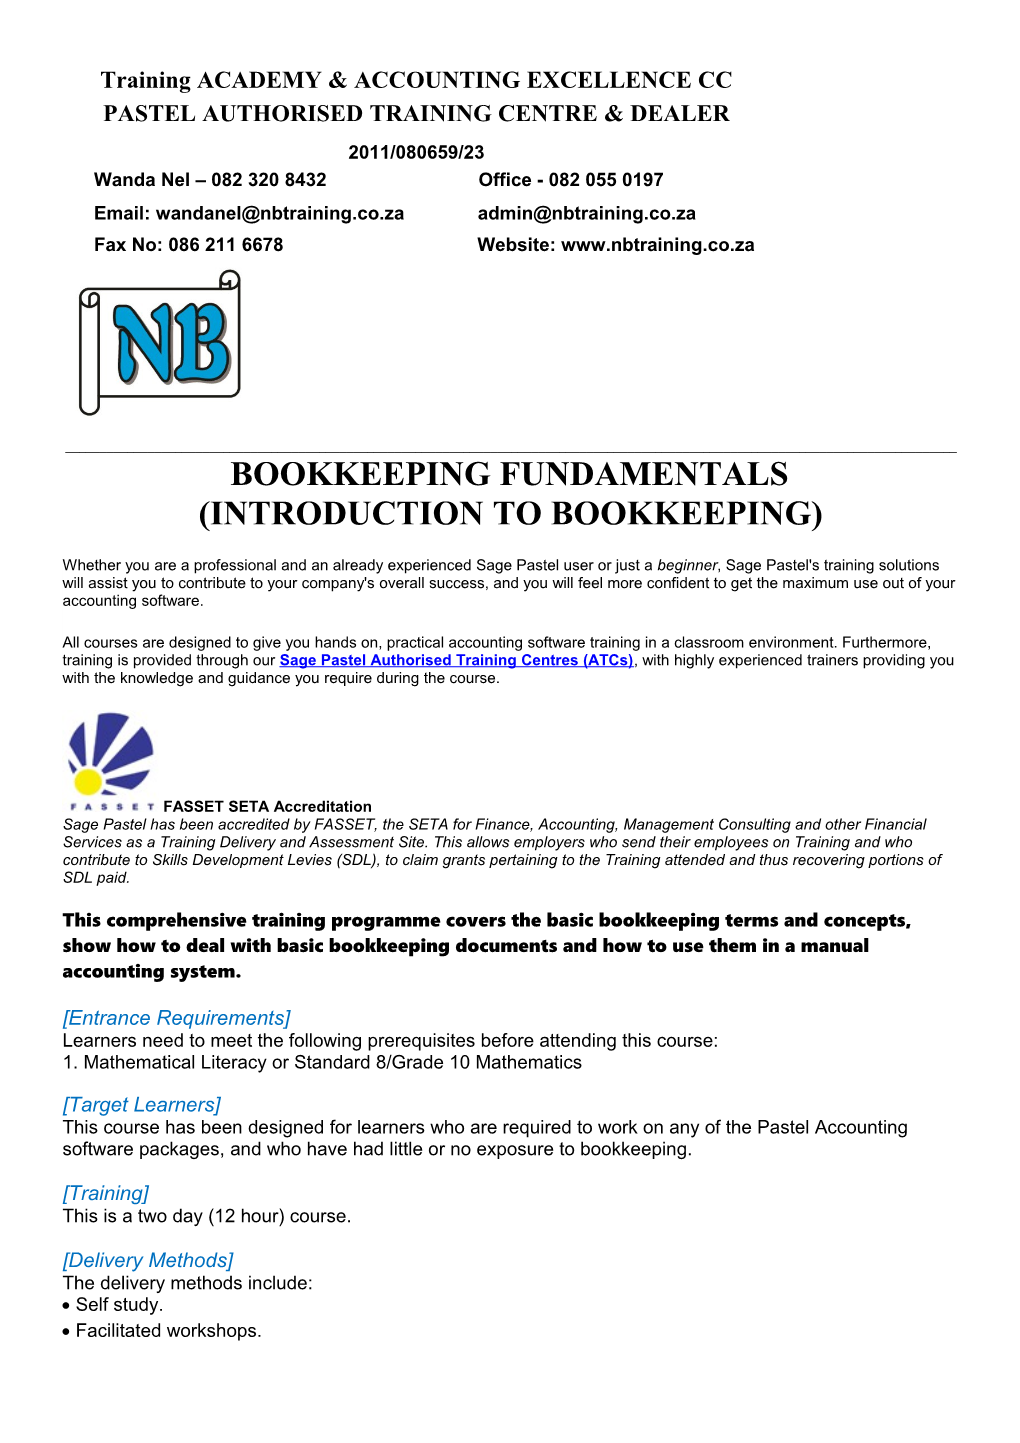 Introduction to Bookkeeping